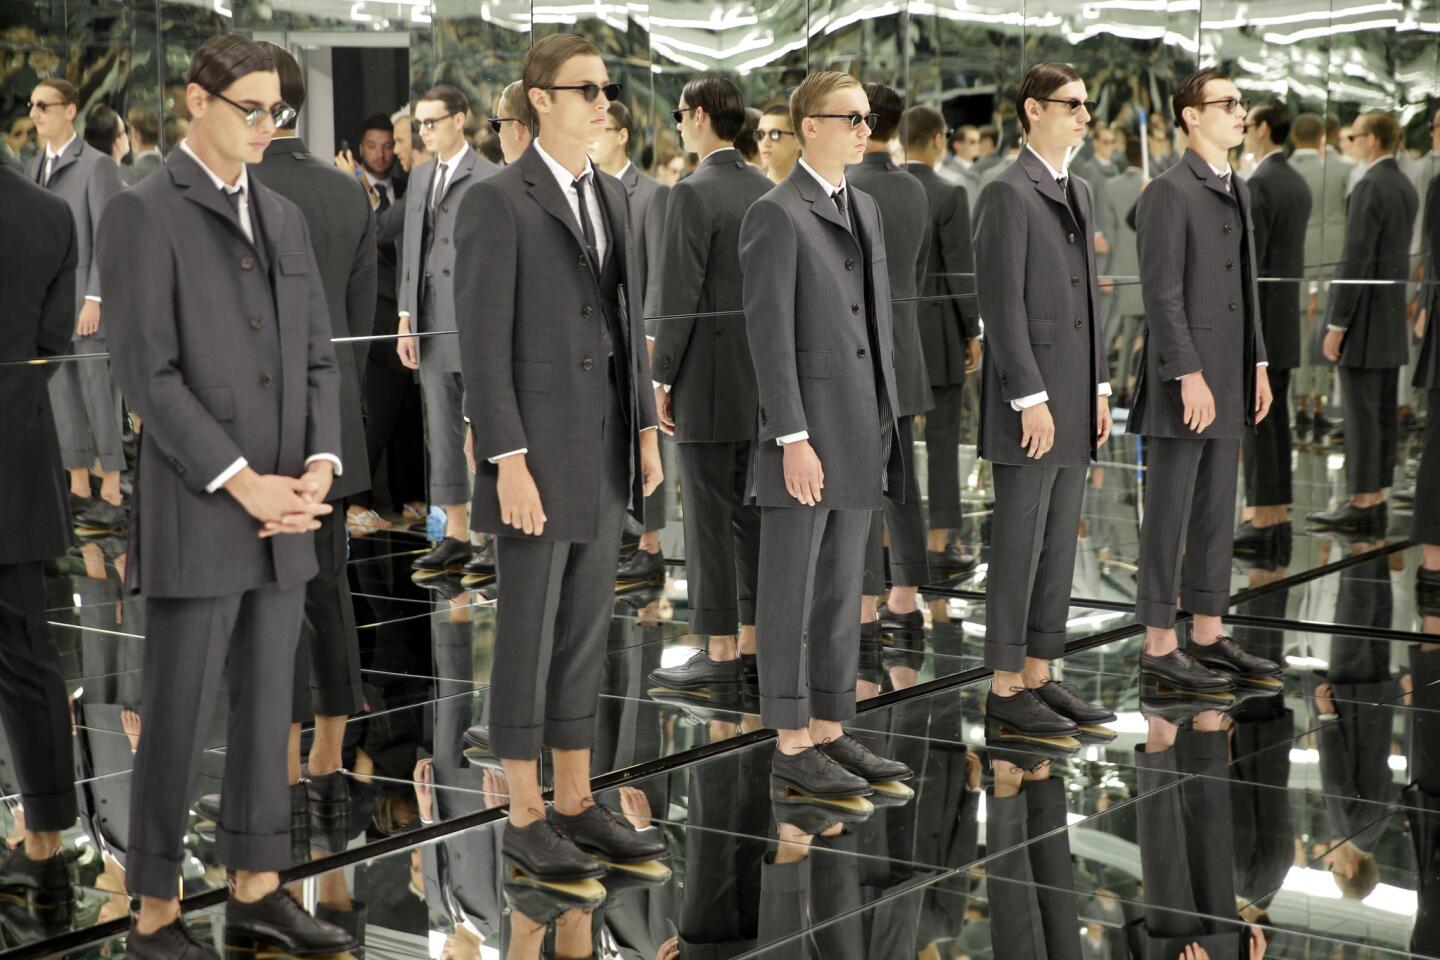 Models display fashions from Thom Browne.